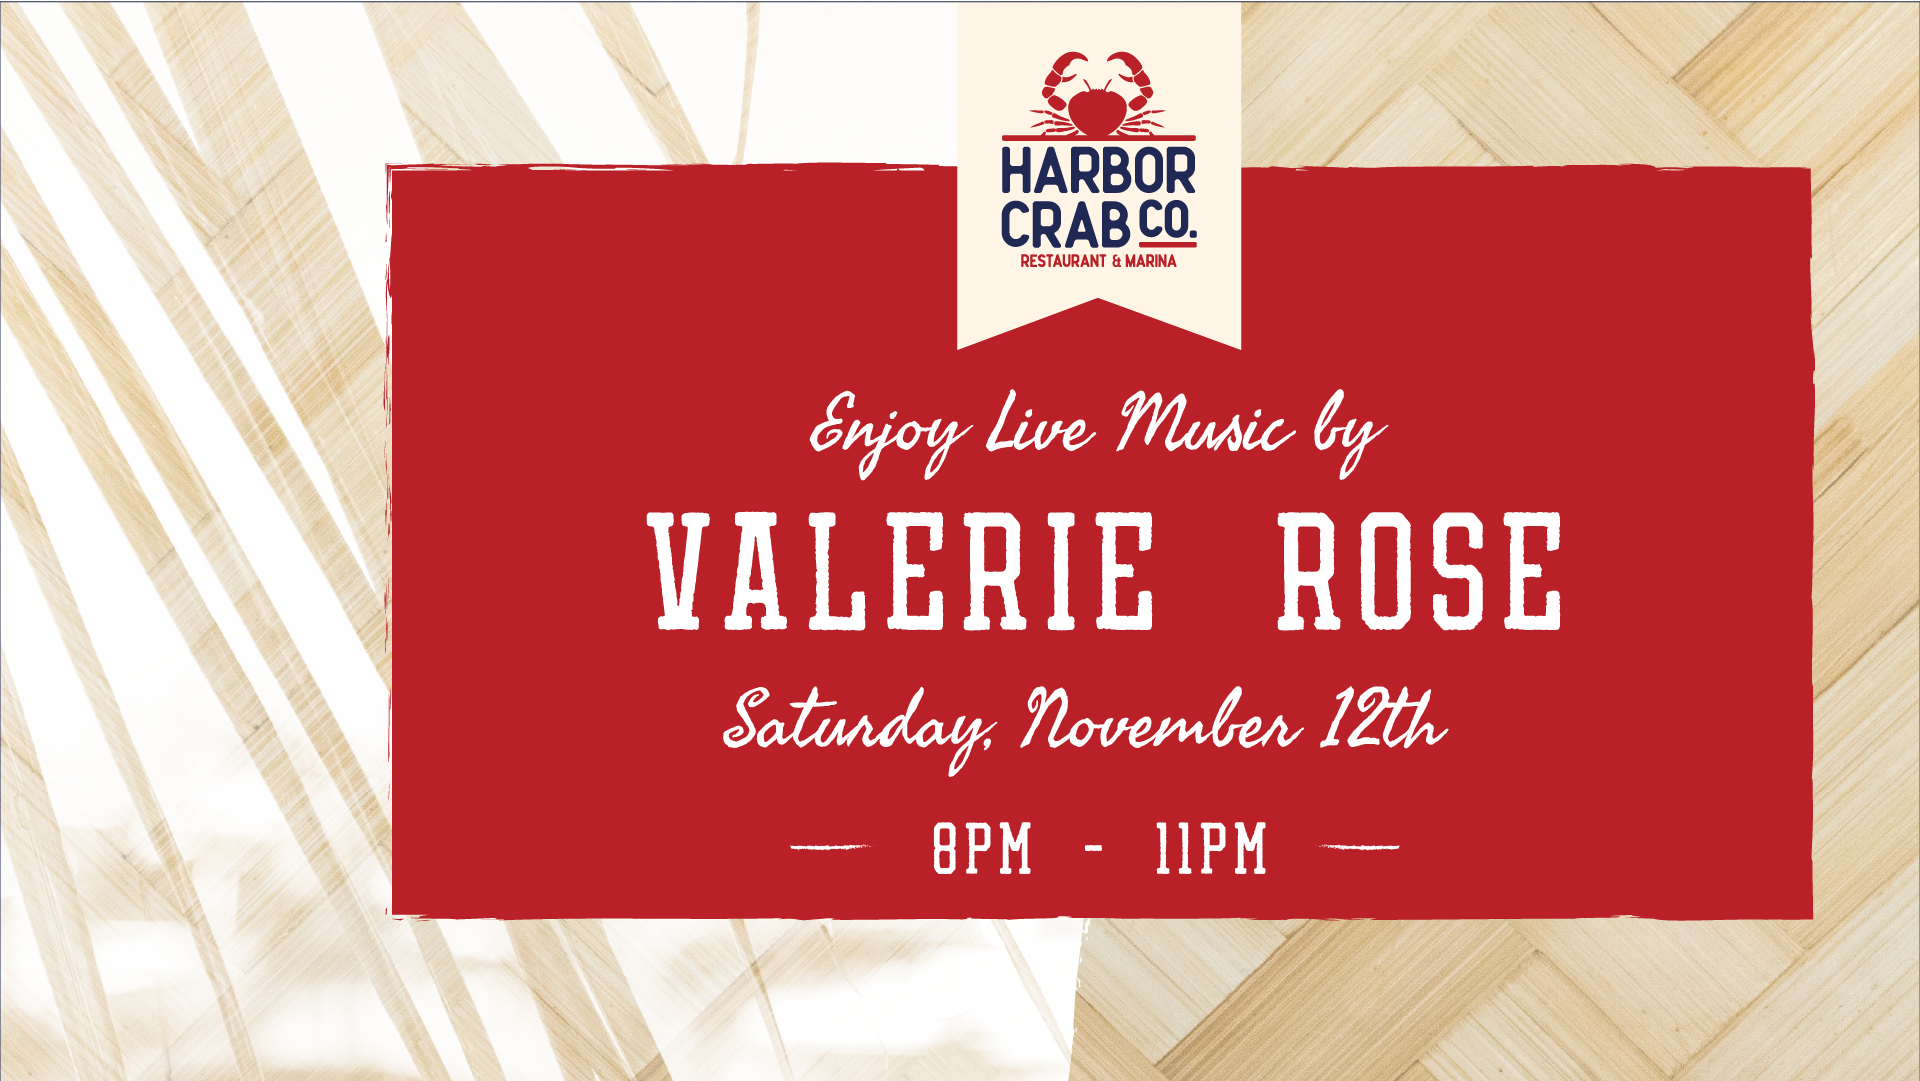 Live Music with Valerie Rose on Saturday, November 12th